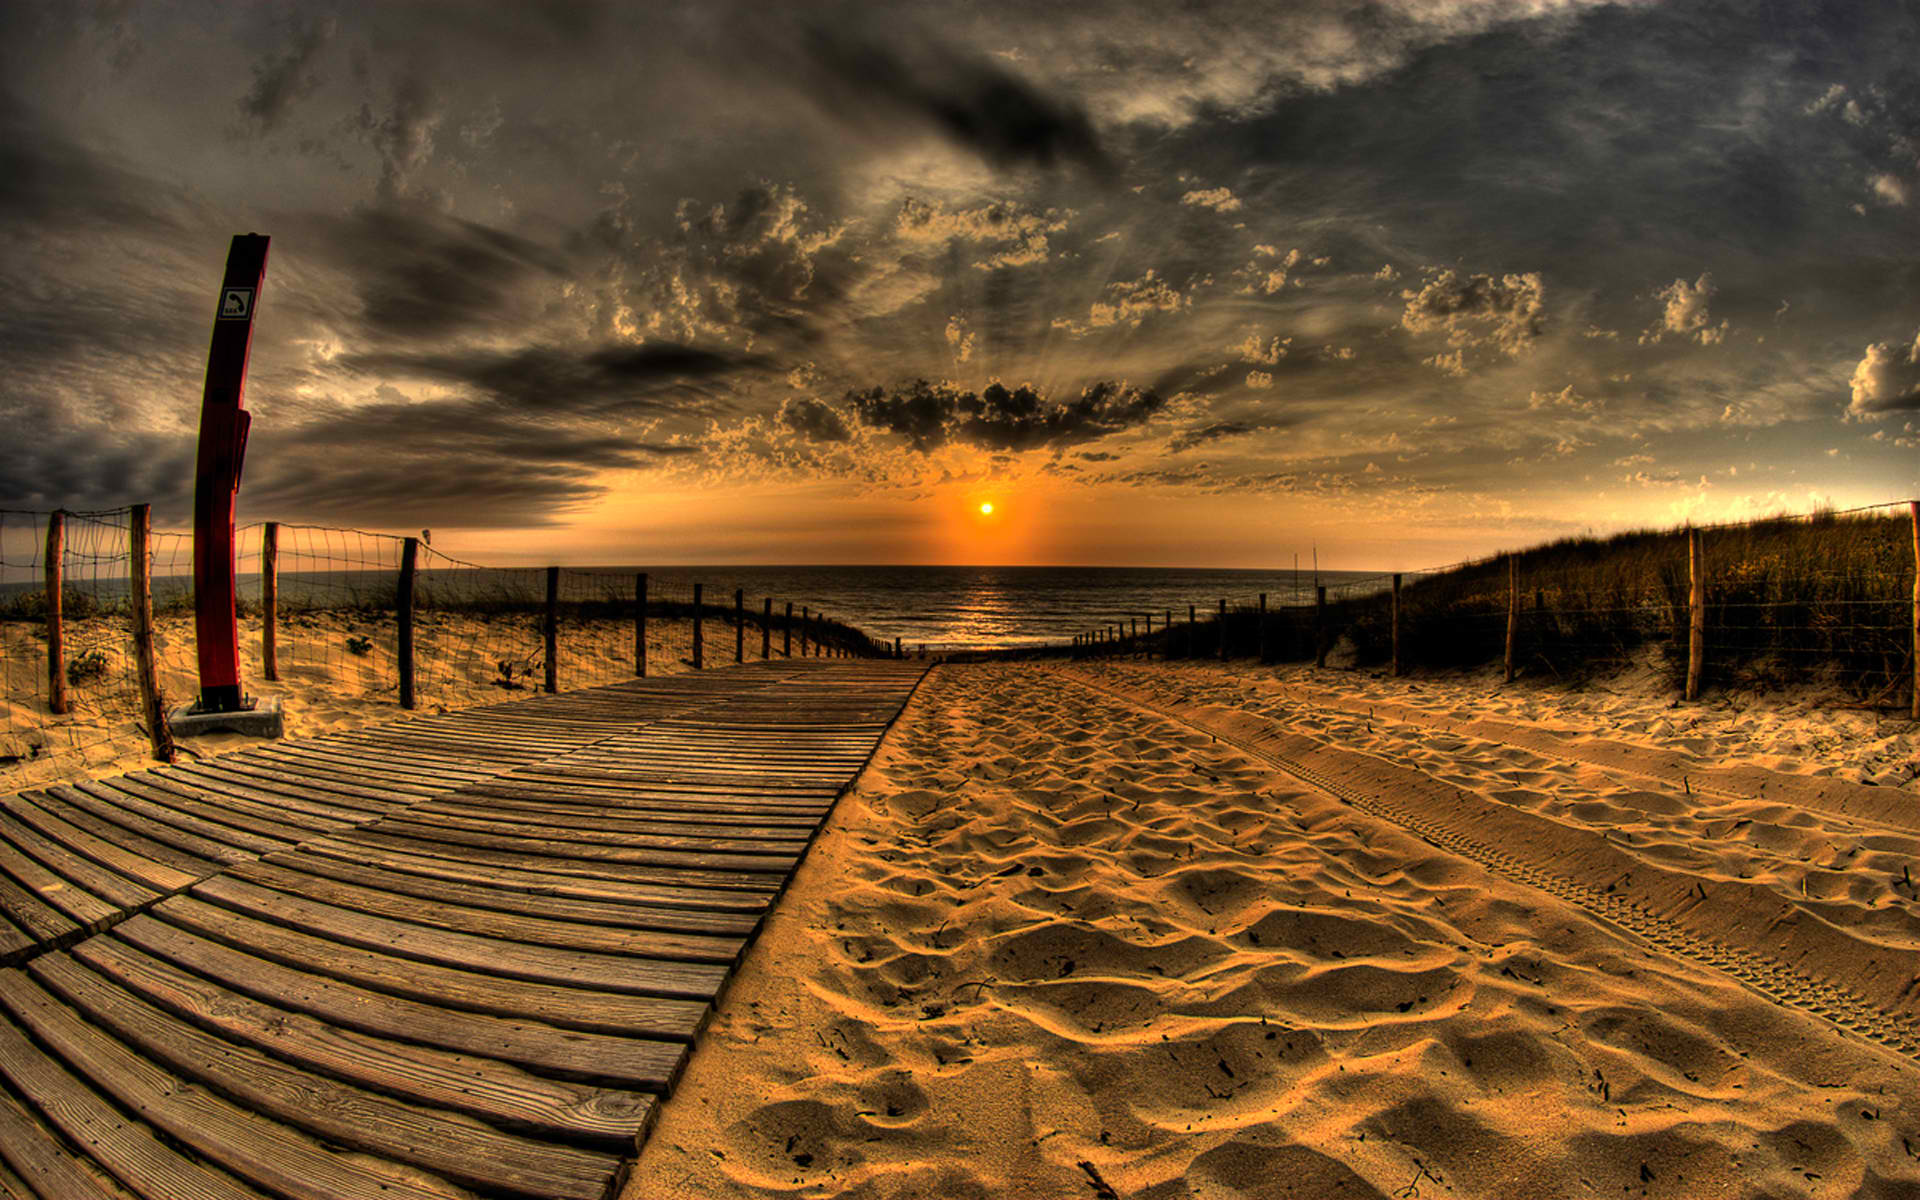 A serene sunset over a sandy beach, with a fence, clouds, water, and the Earth in view.